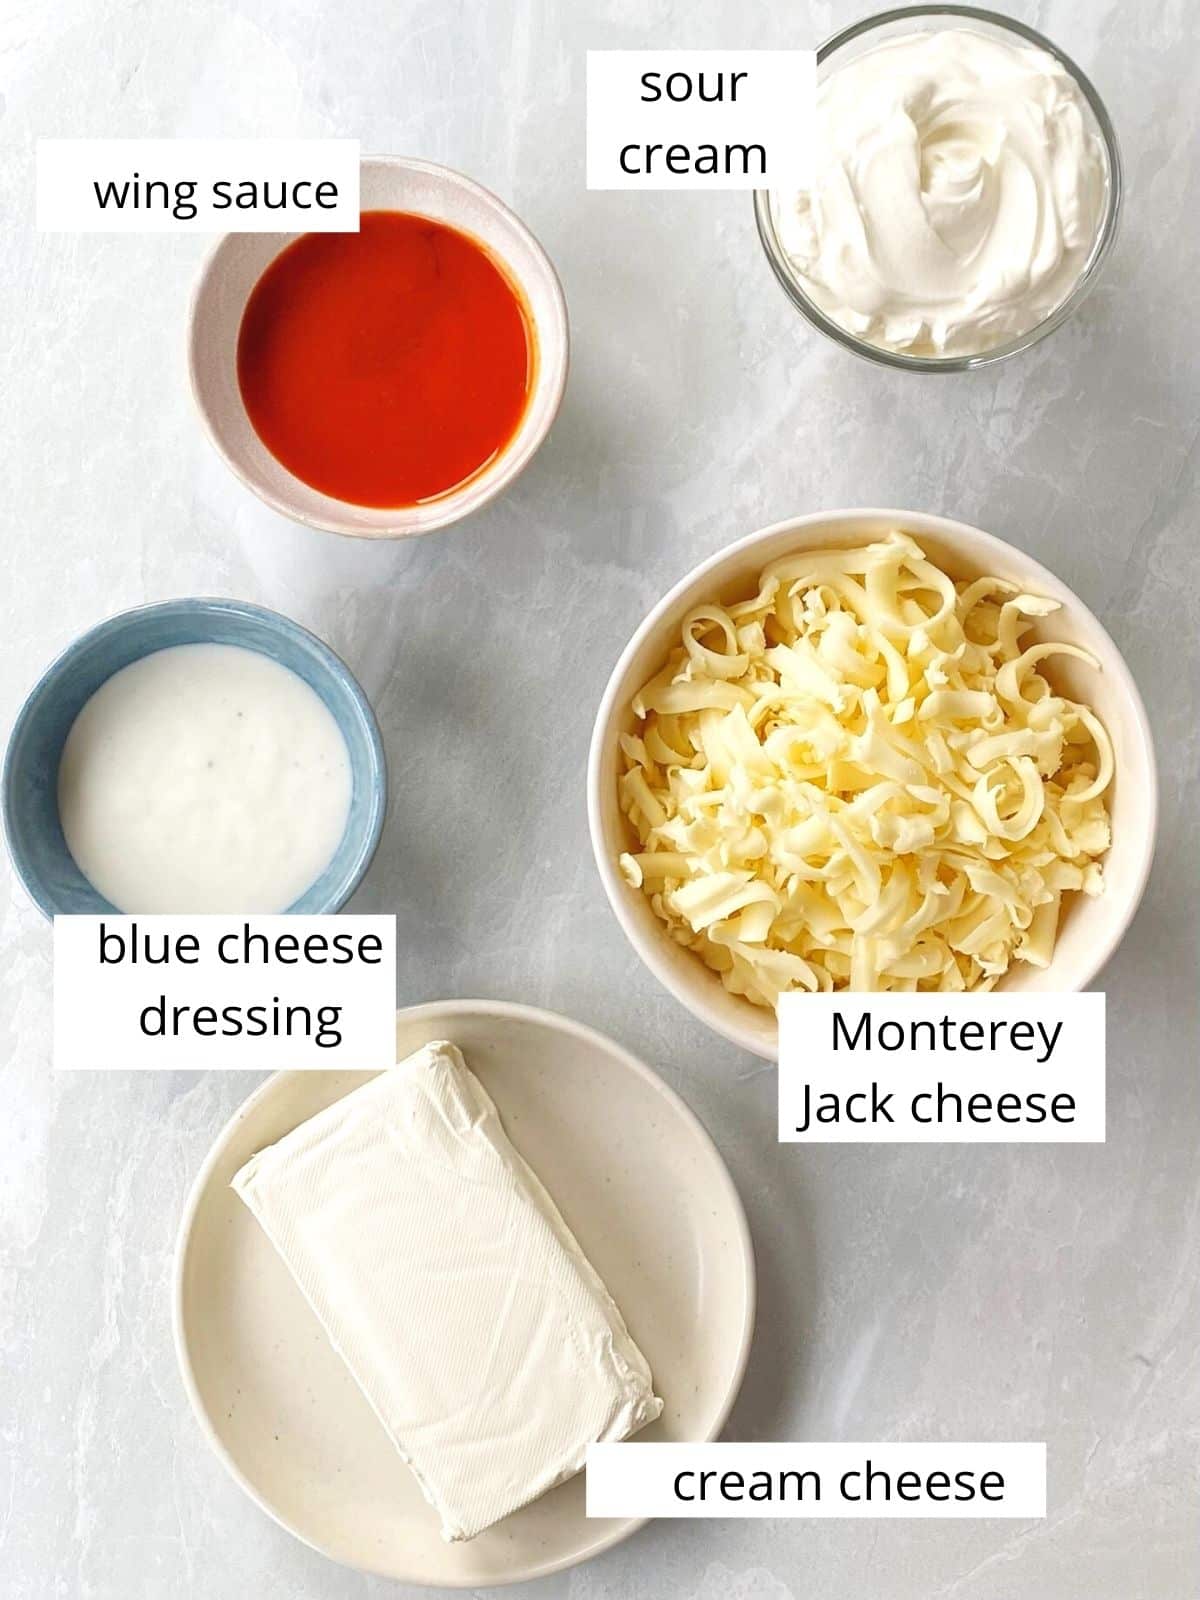 ingredients for buffalo cheese dip.